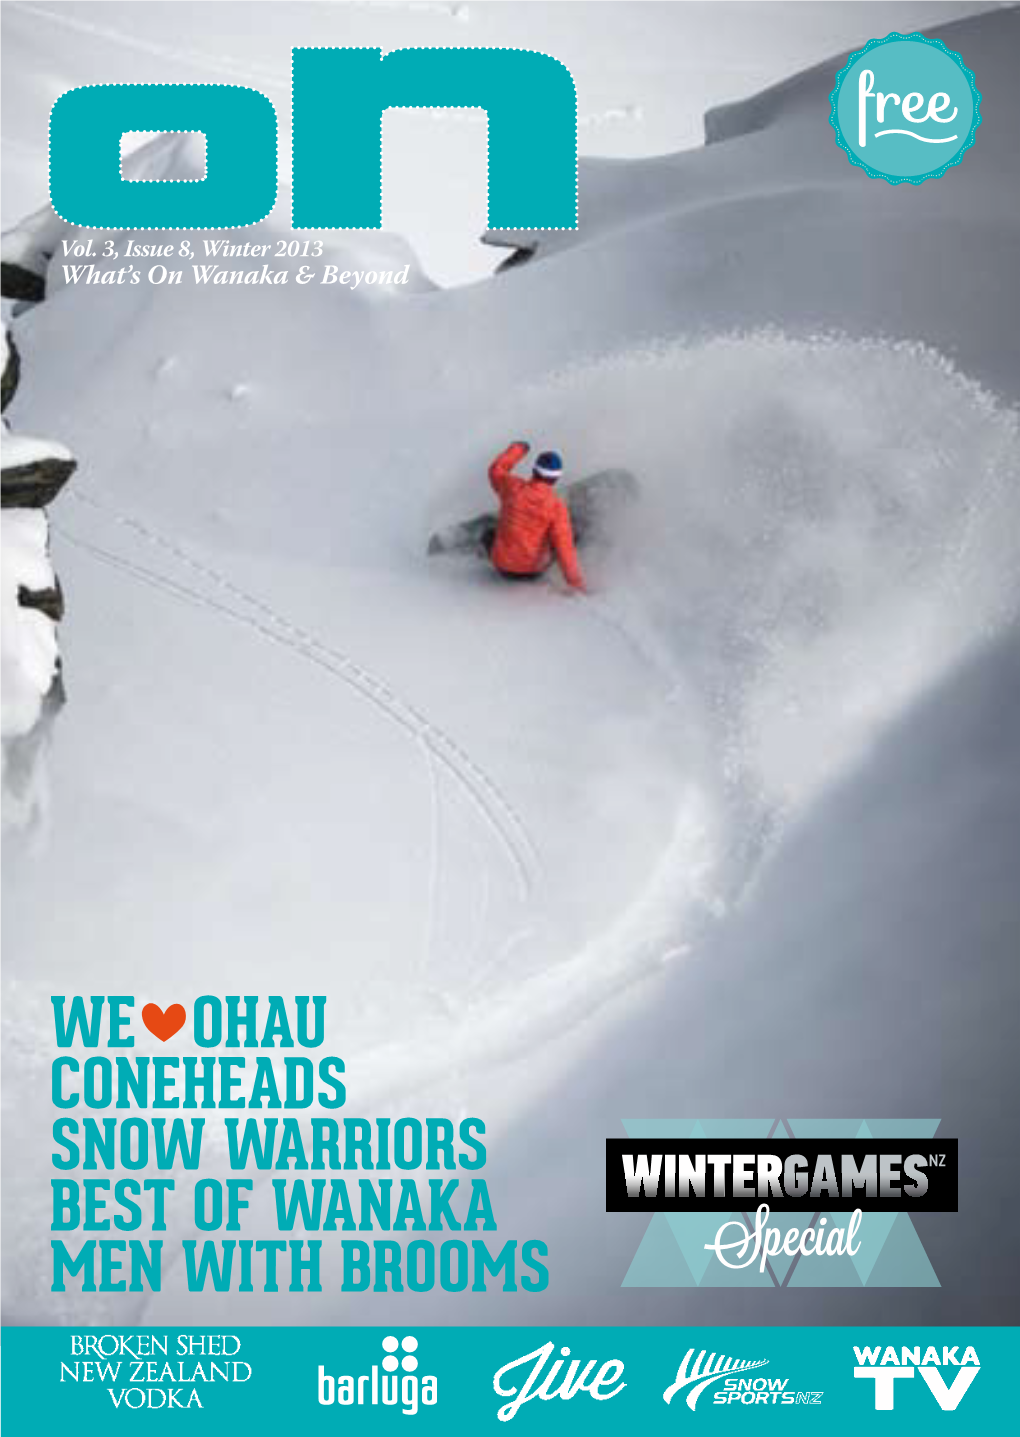 We Ohau Coneheads Snow Warriors Best of Wanaka Men with Brooms Special